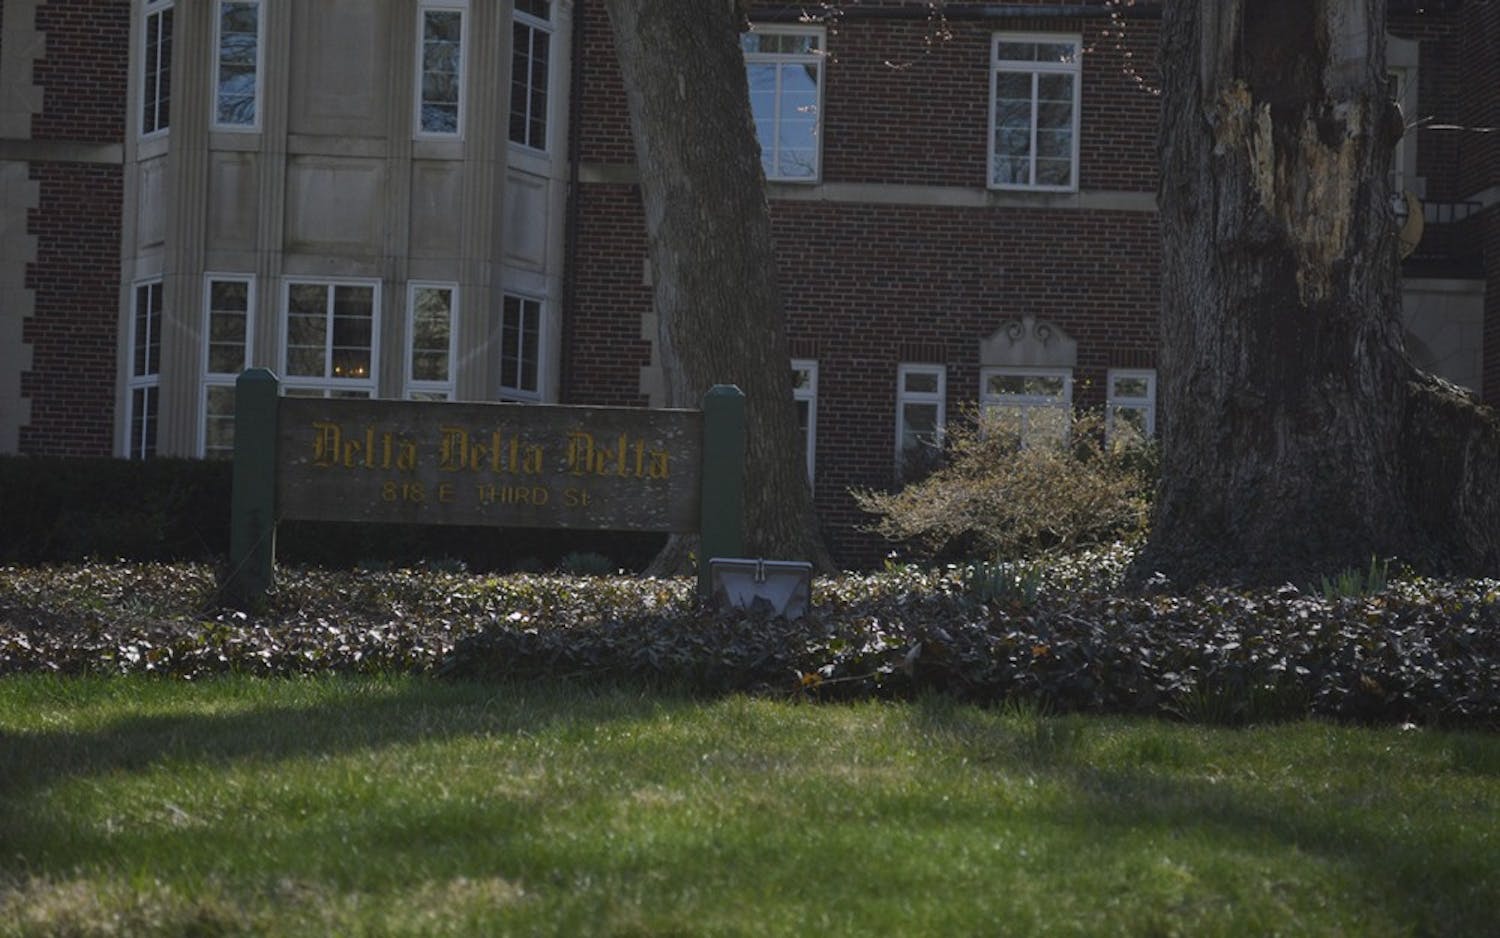 The Delta Delta Delta house sits on Third Street. The IU Delta Omicron chapter of Delta Delta Delta was revoked Saturday after the group's national organization said the IU members' activities clashed with Tri Delt's high standards and purpose.